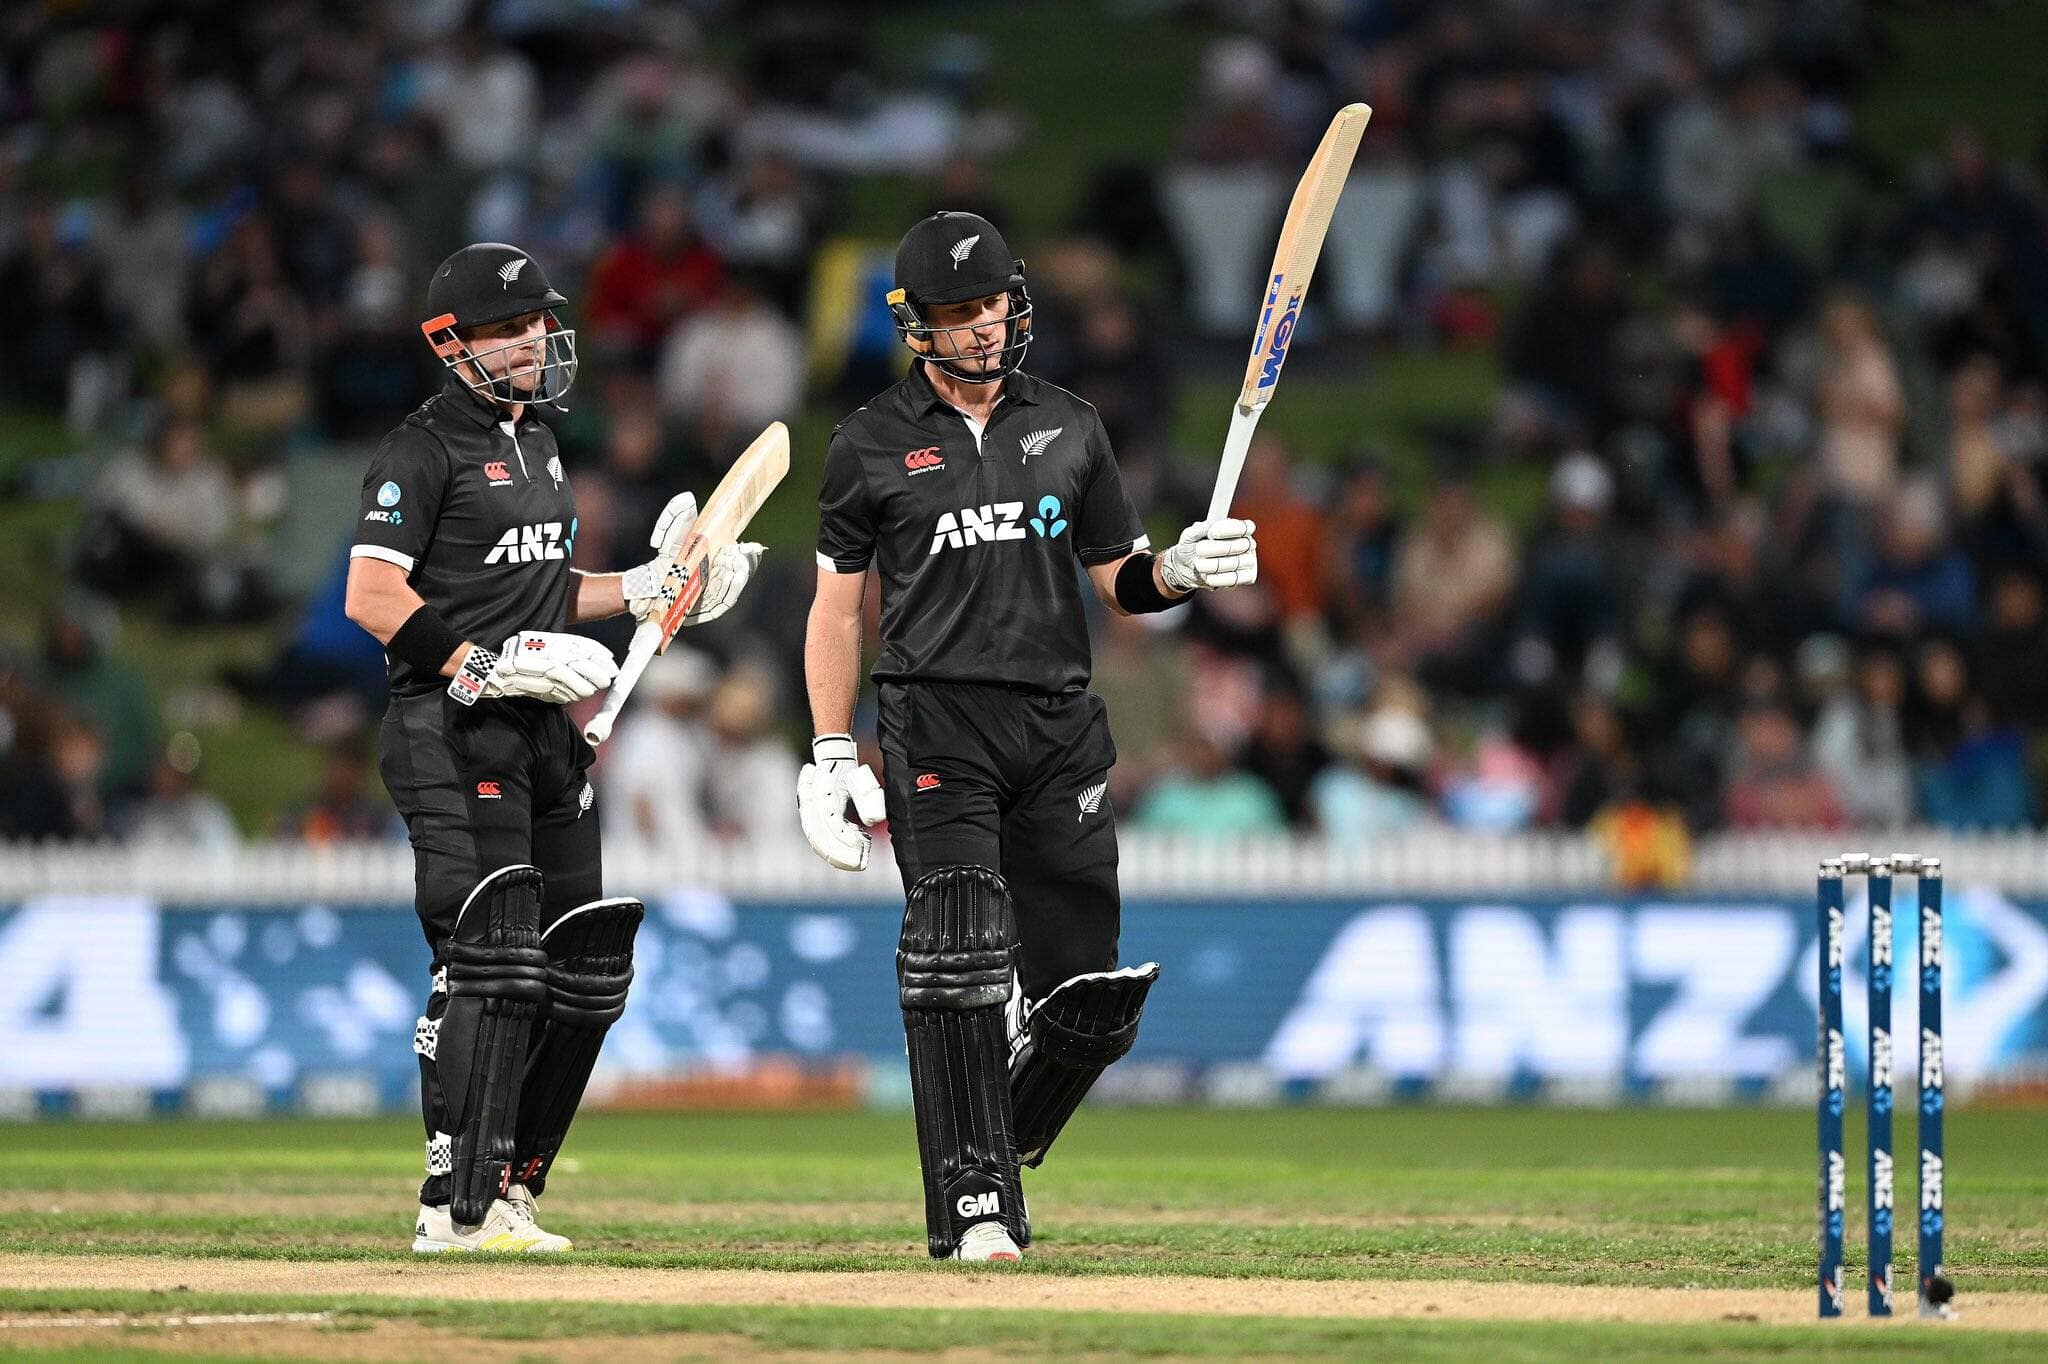 NZ vs SL, 1st T20I: Preview, Pitch Report, Predicted XIs, Fantasy Tips & Prediction